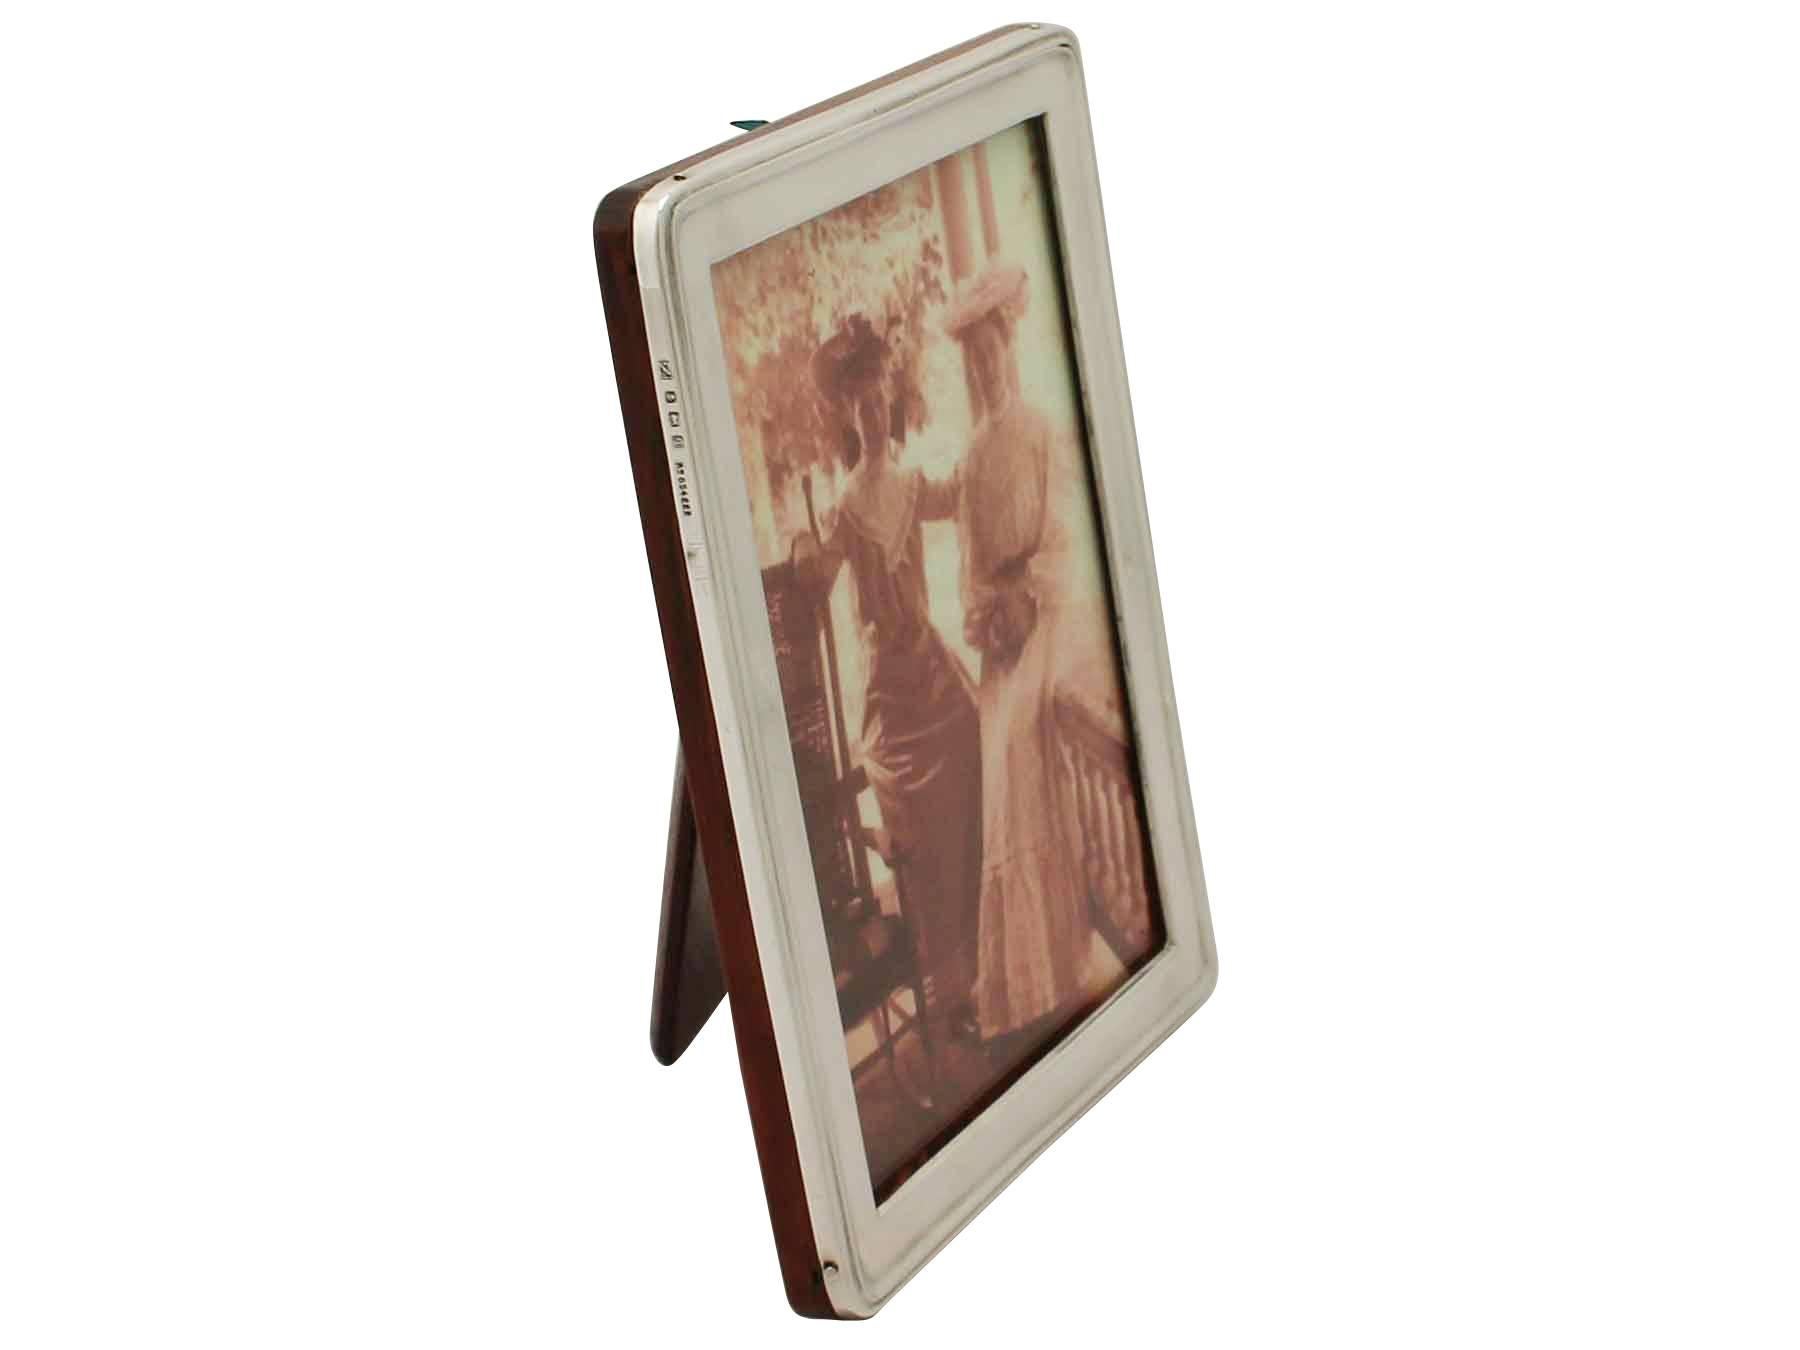 This fine antique sterling silver photograph frame has a rectangular form with rounded corners.

The surface of this George V frame is plain and embellished with a paralleling convex embossed decorated border to the rim.

This photograph frame